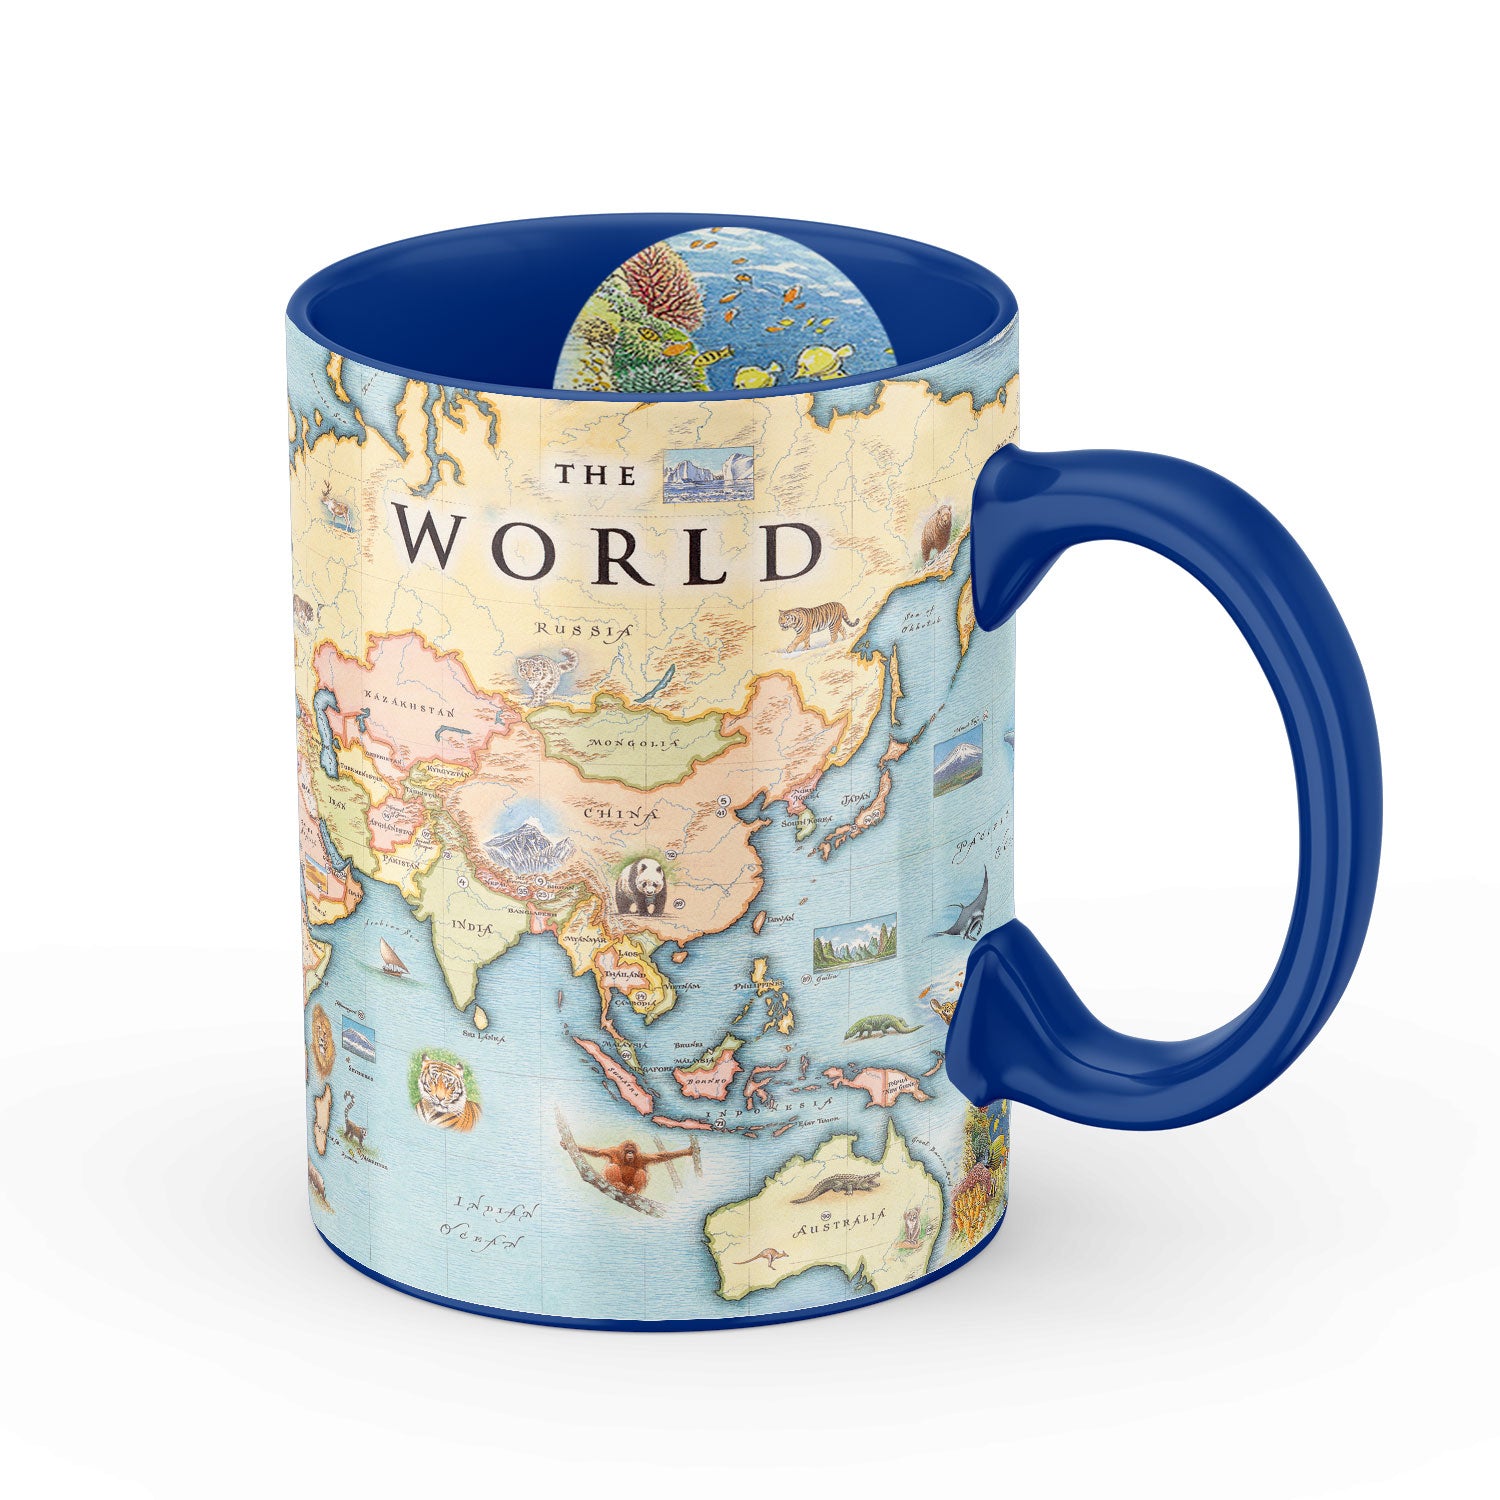 Blue 16 oz World Map Ceramic Mug. The map features the entire world with illustrations of significant places and major flora and fauna. Some places include Machu Pichu, the Eiffel Tower, Mount Everest, and Easter Island. 